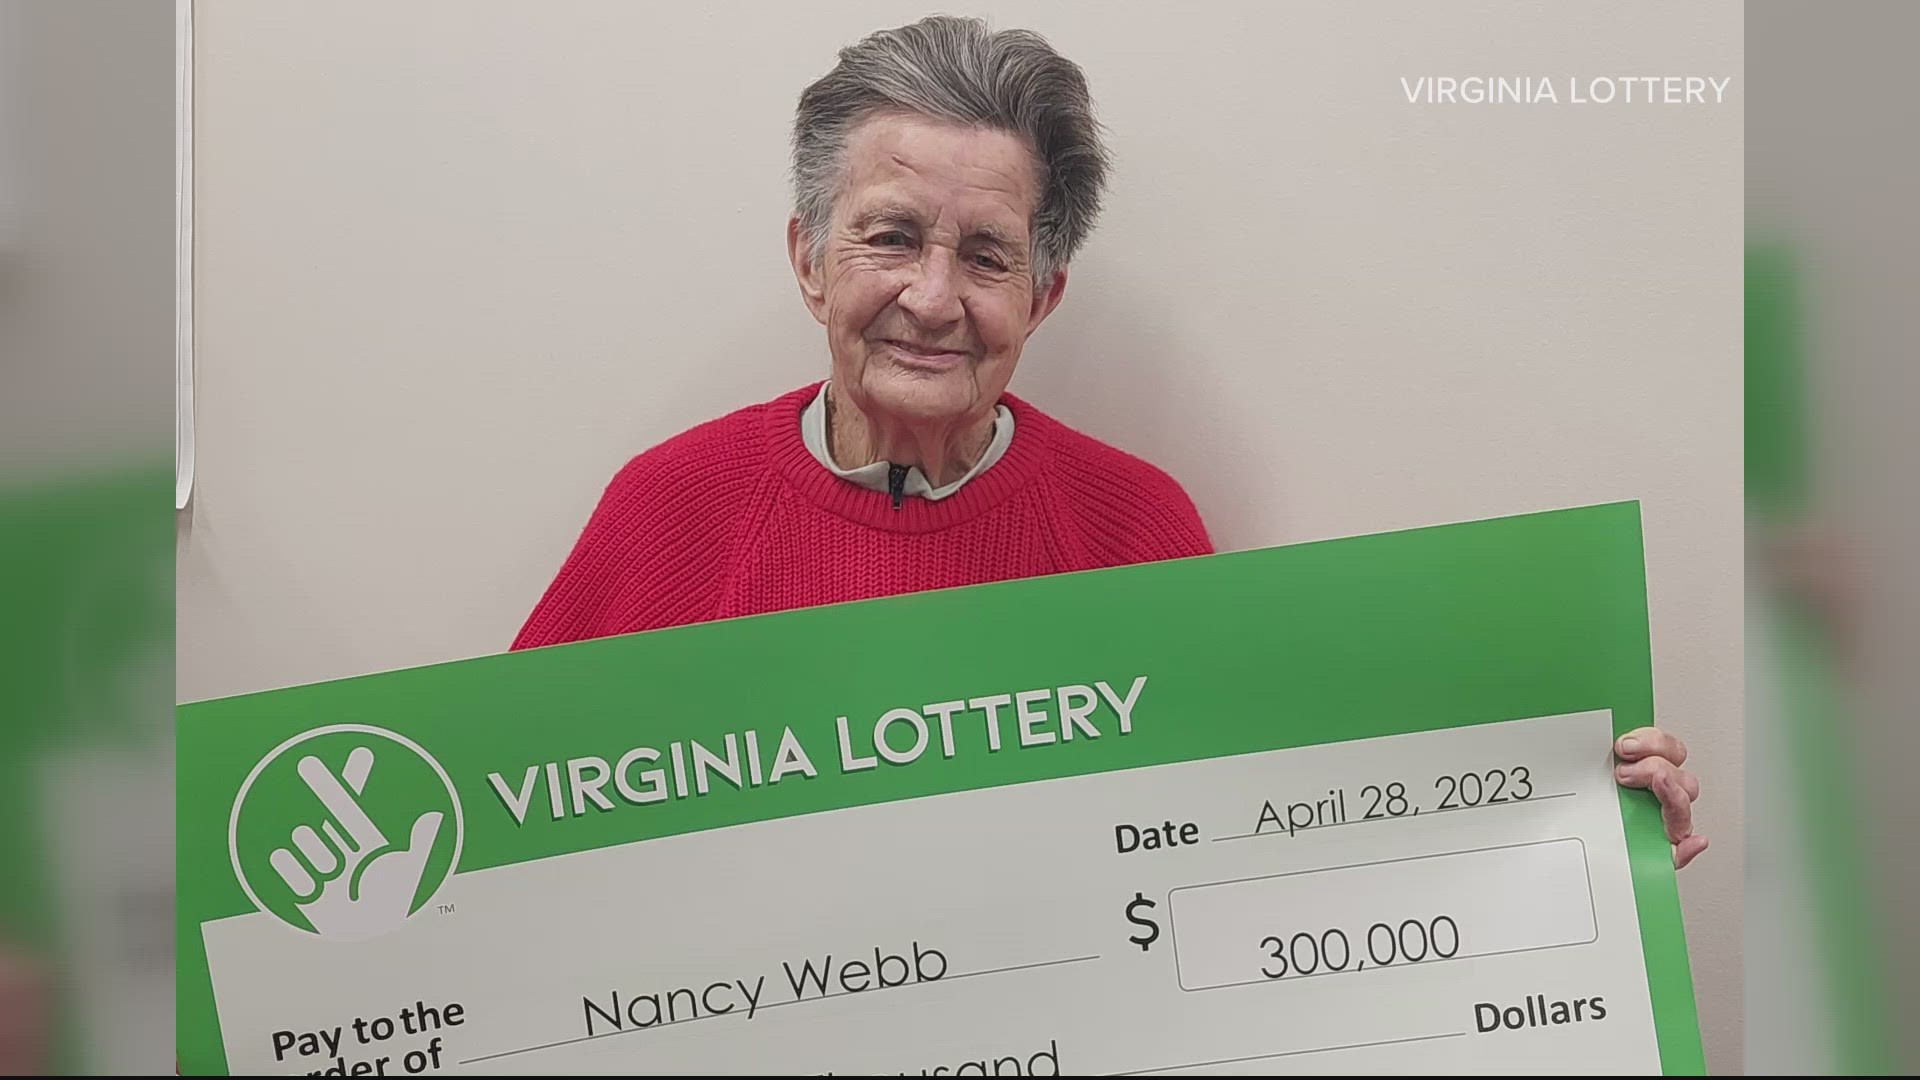 A woman in central Virginia has bananas to thank for her luck in the lottery!